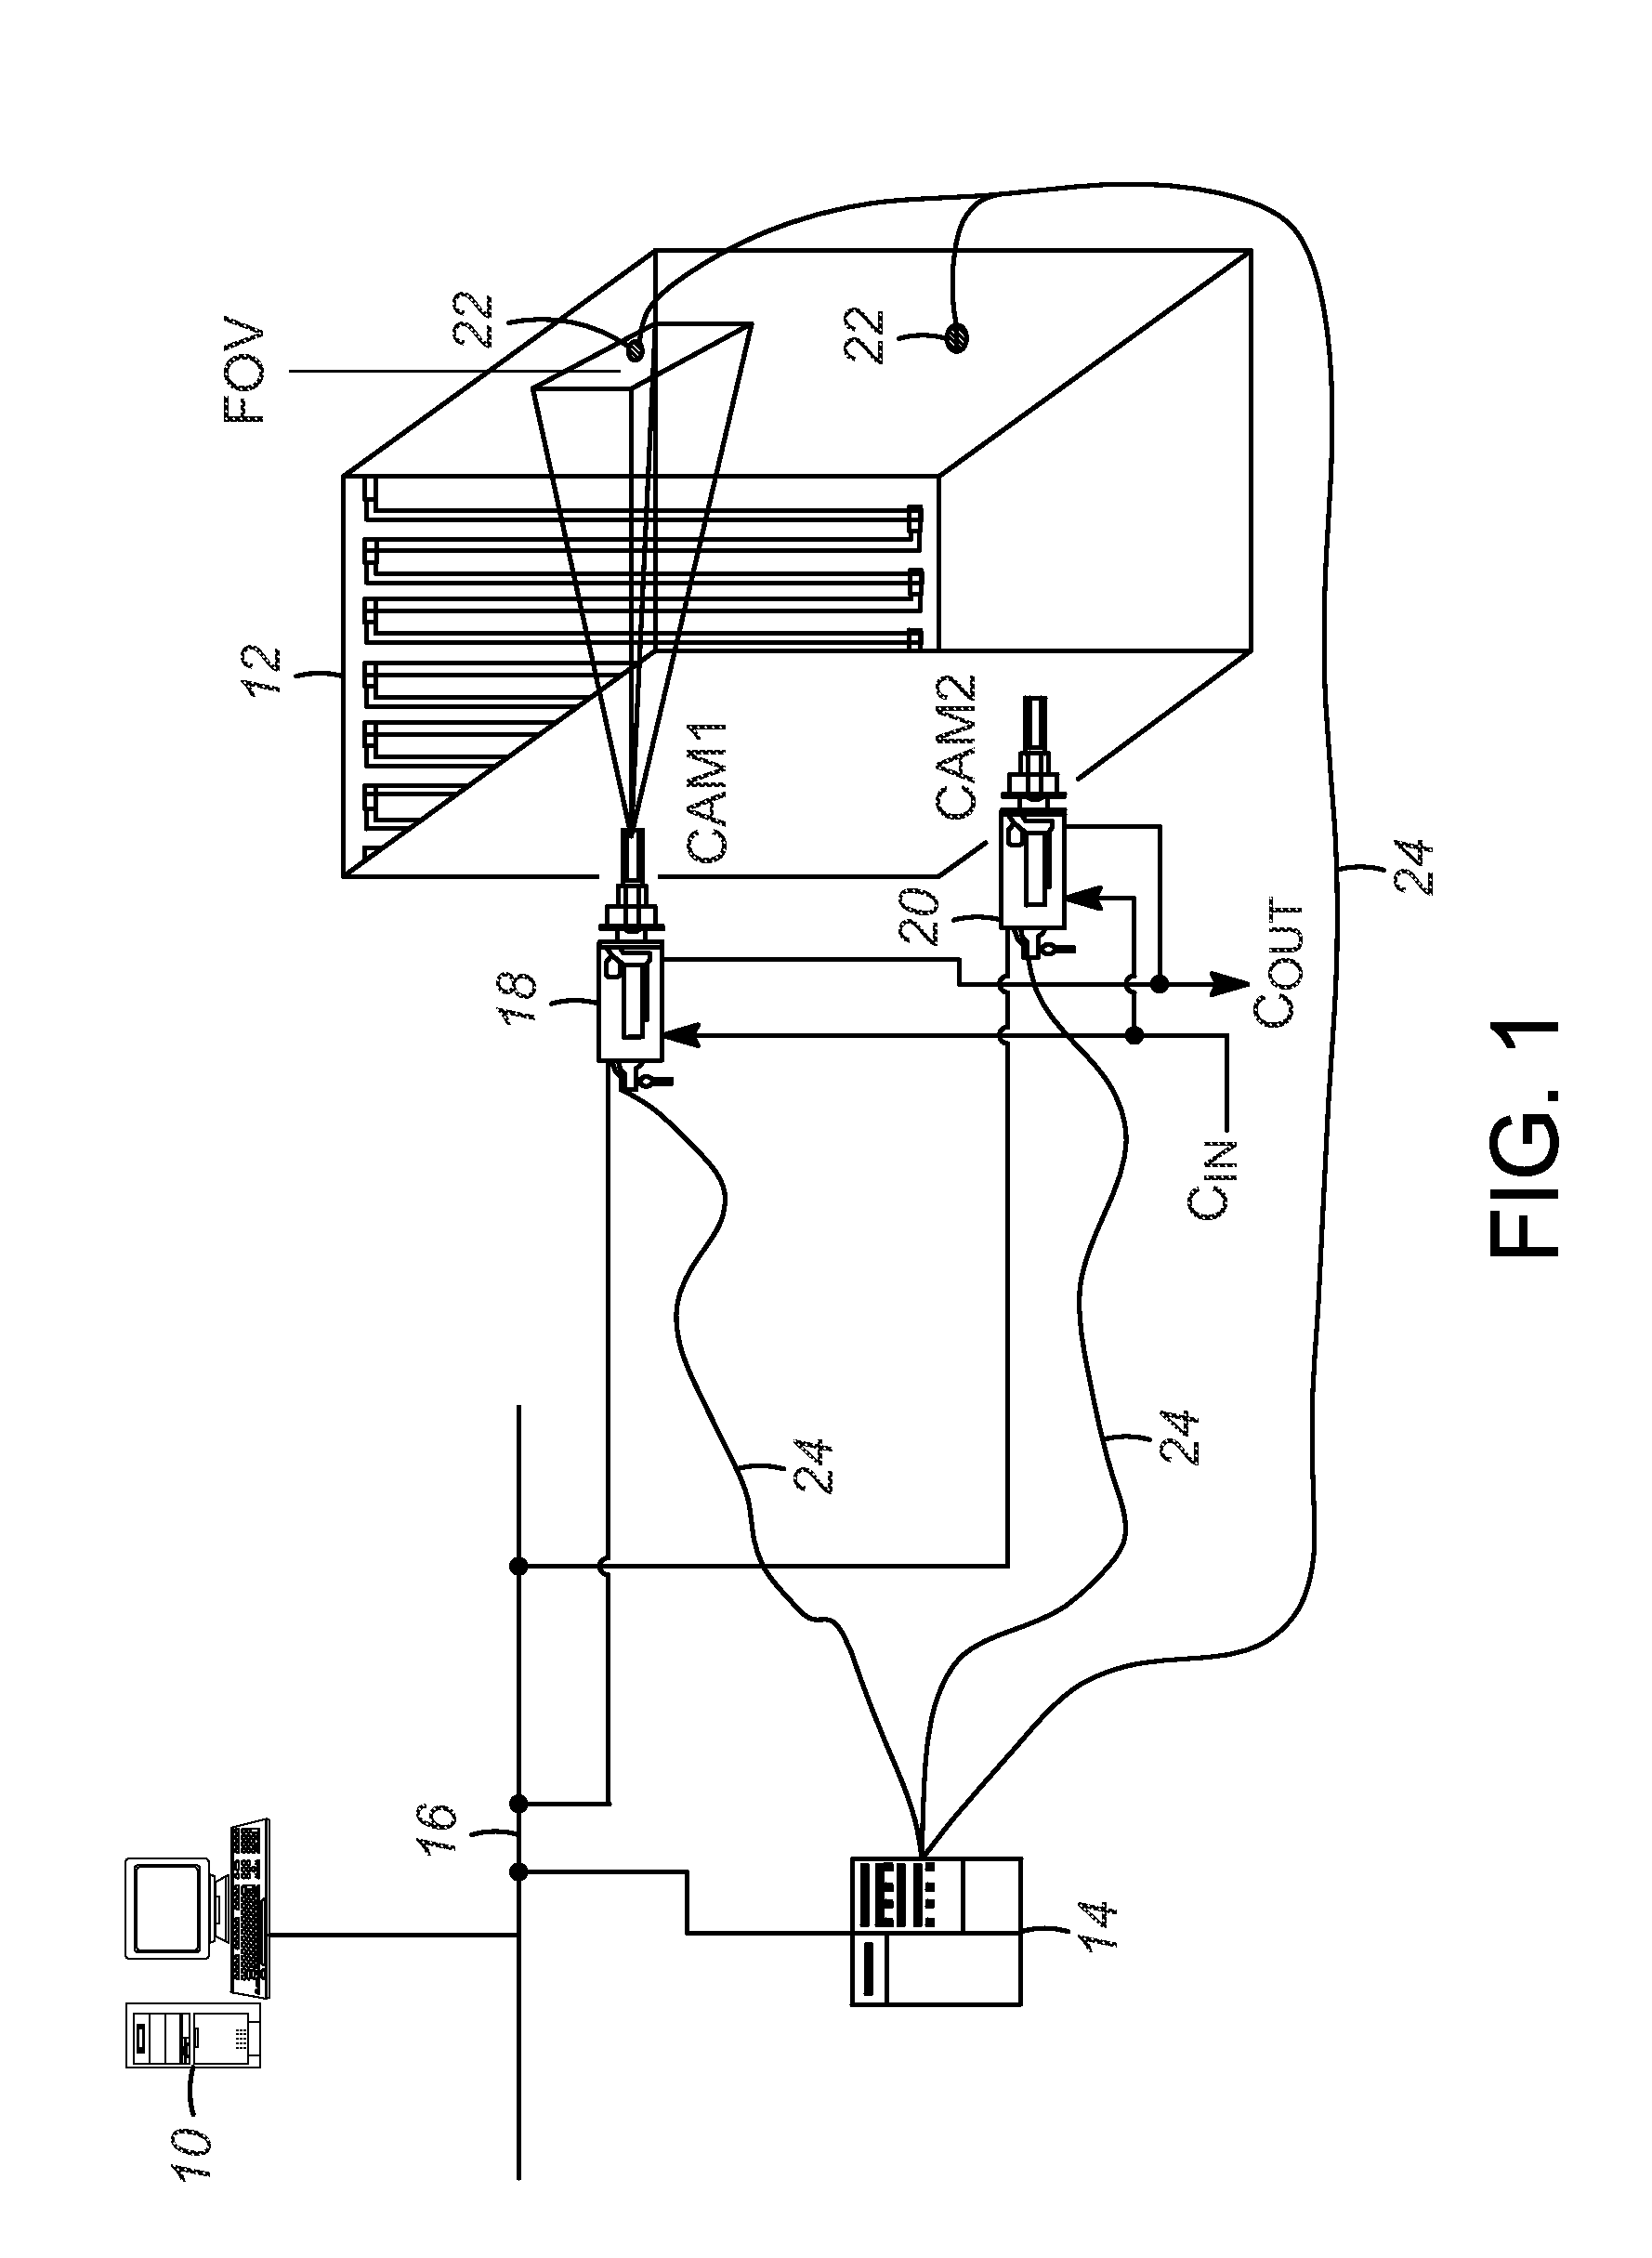 Extended temperature range mapping process of a furnace enclosure using various device settings